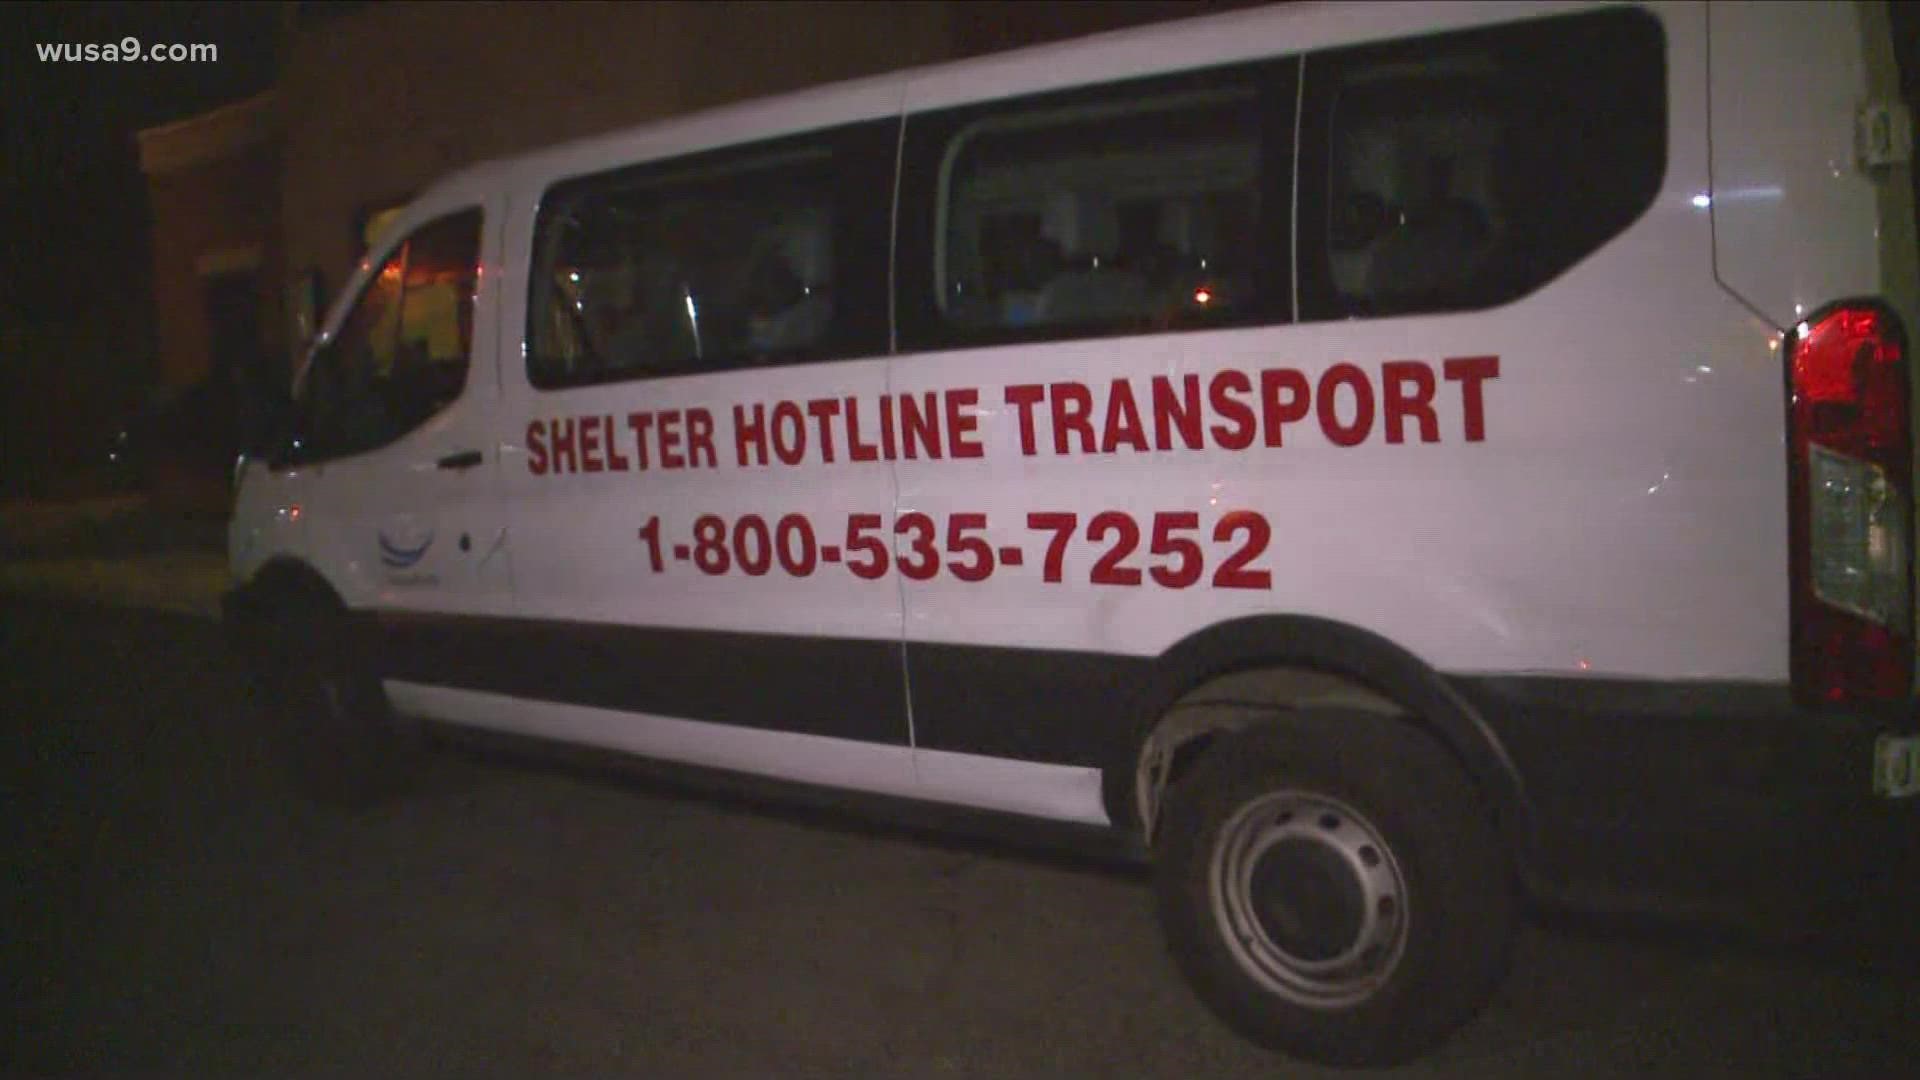 Transportation to a shelter is available by calling 202-399-7093.